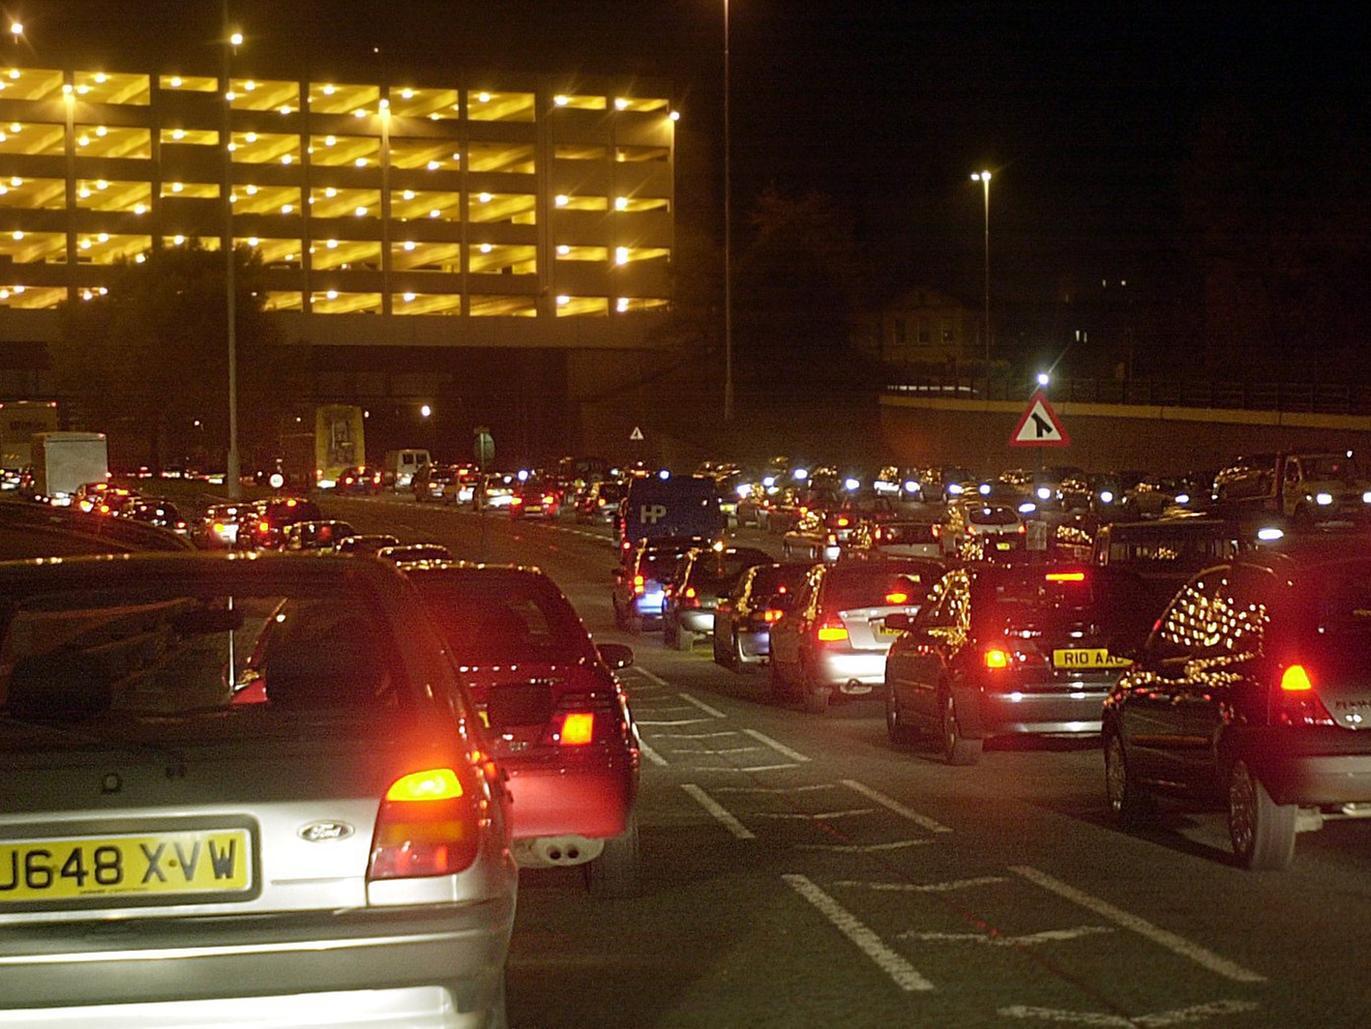 Traffic ground to a halt in both directions of the Leeds Inner Ring Road around 5.30pm as commuters faced long delays in getting home.